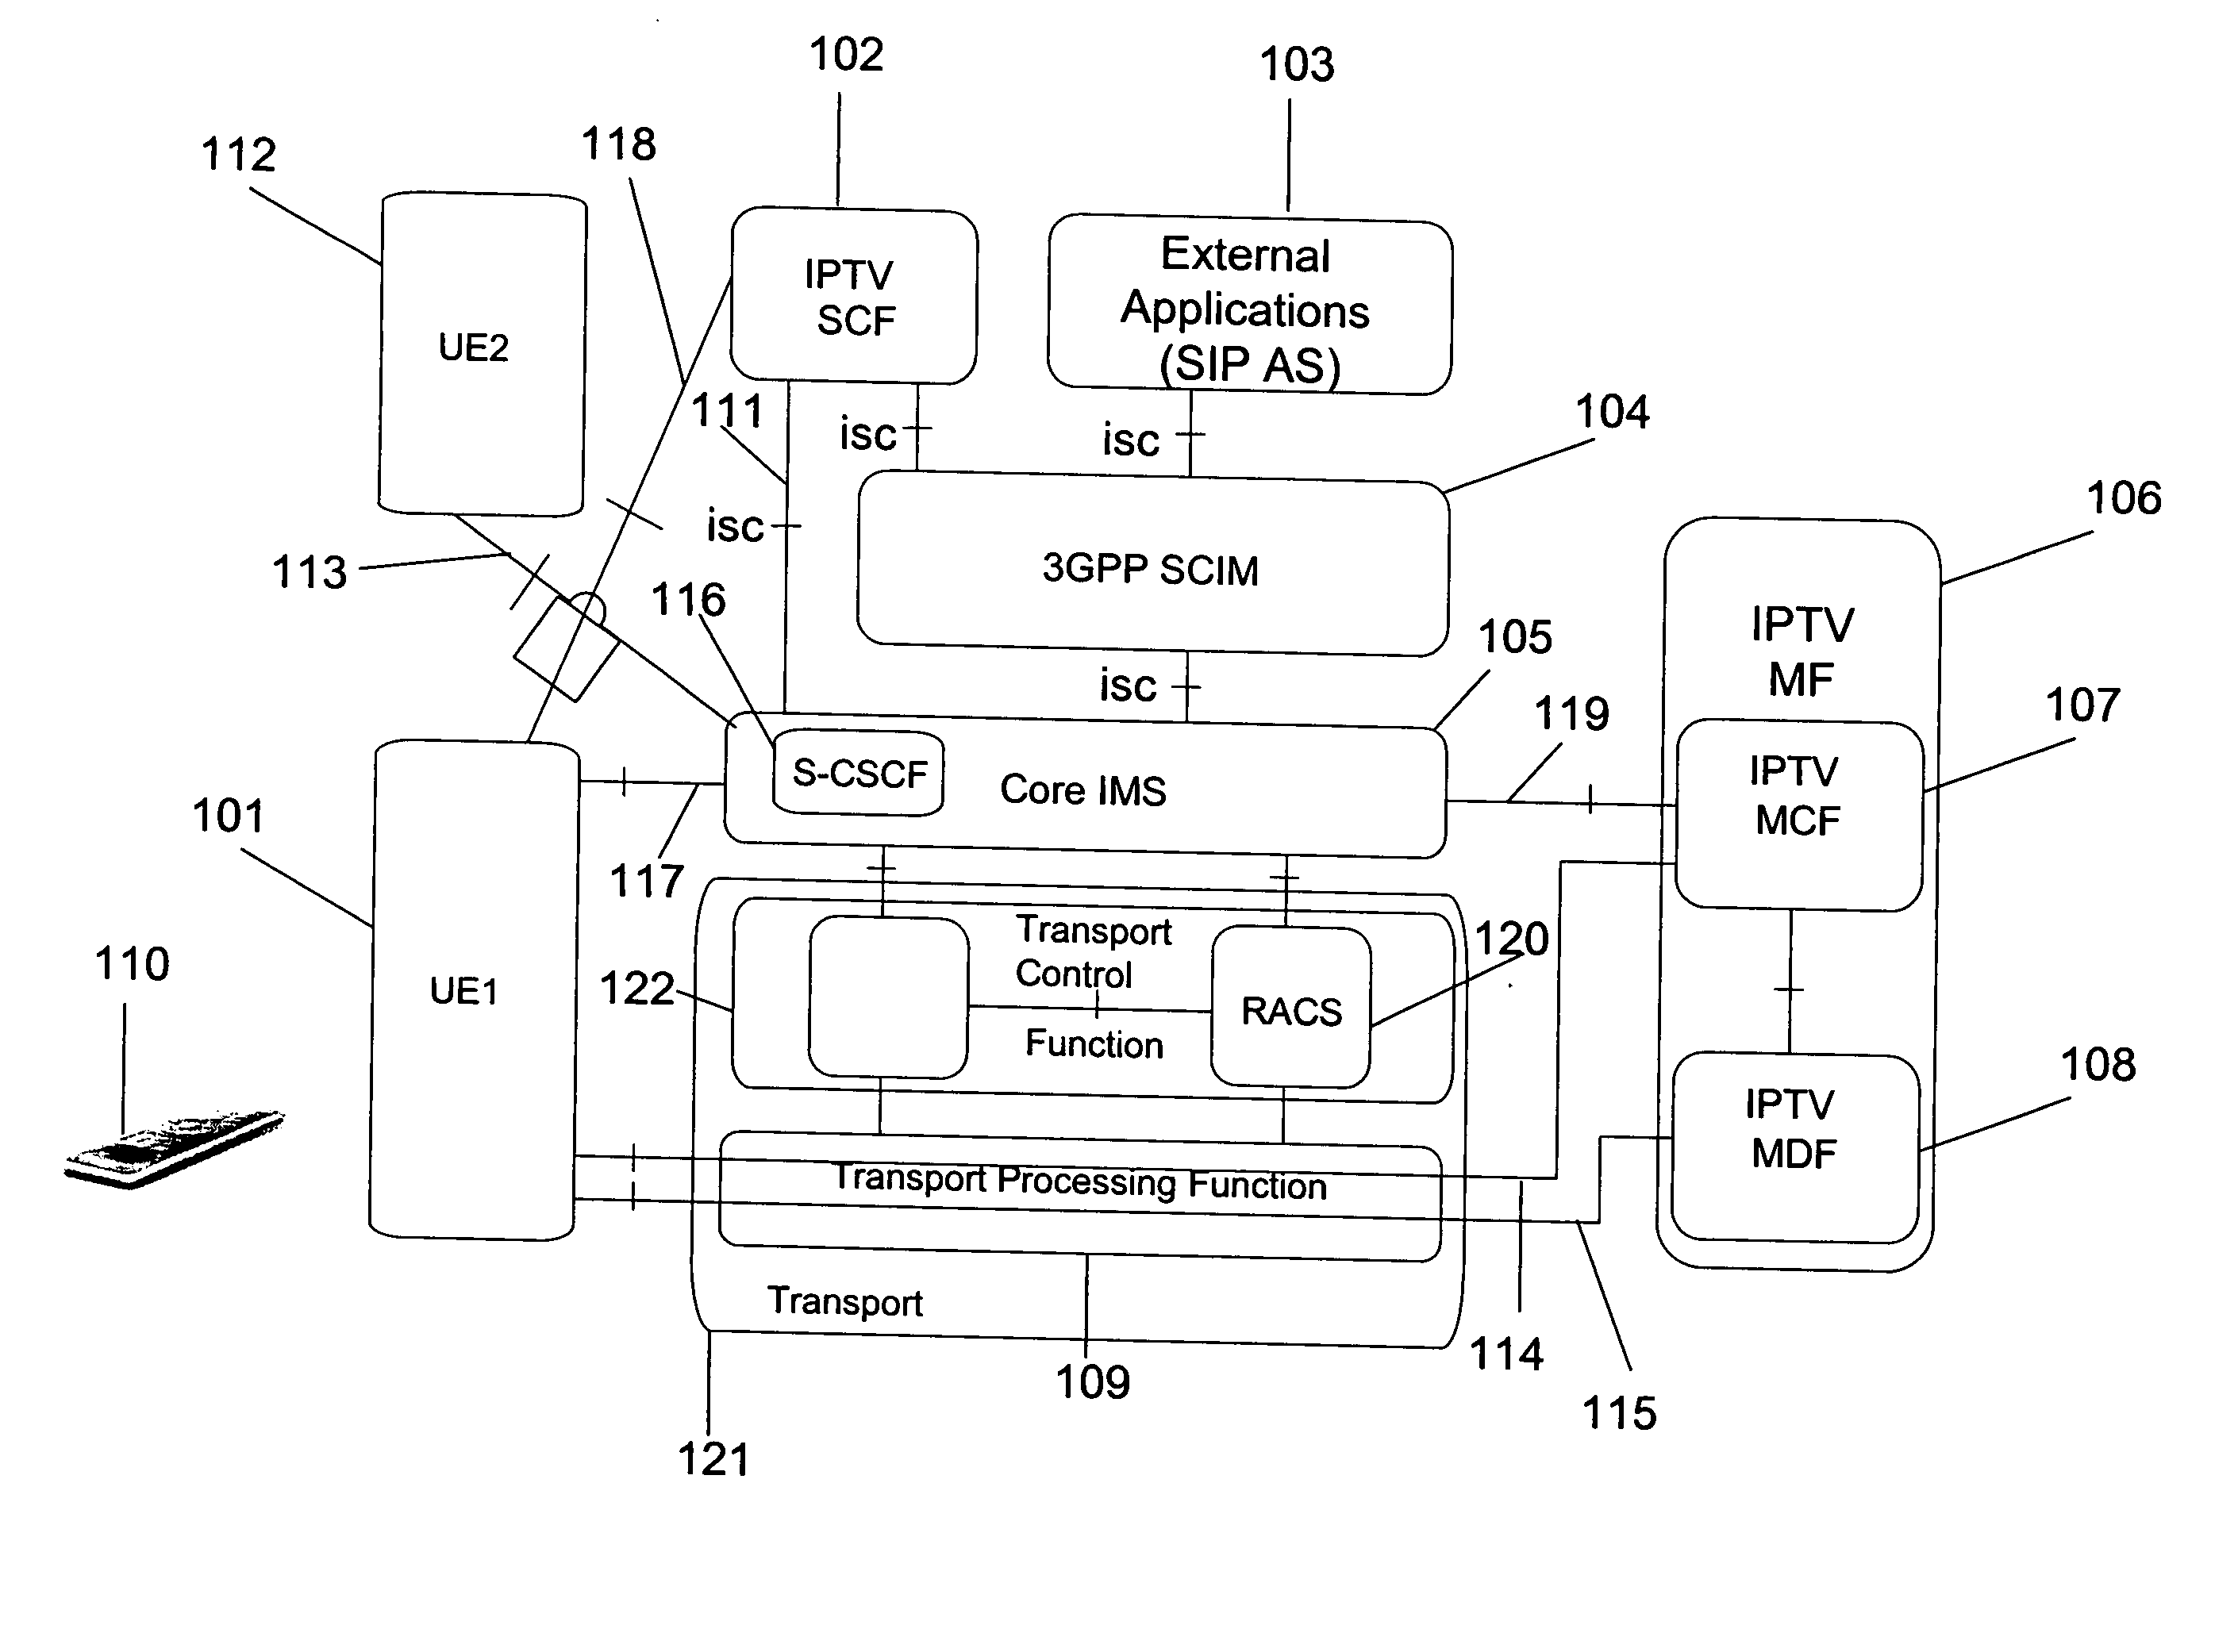 System for Managing Service Interactions